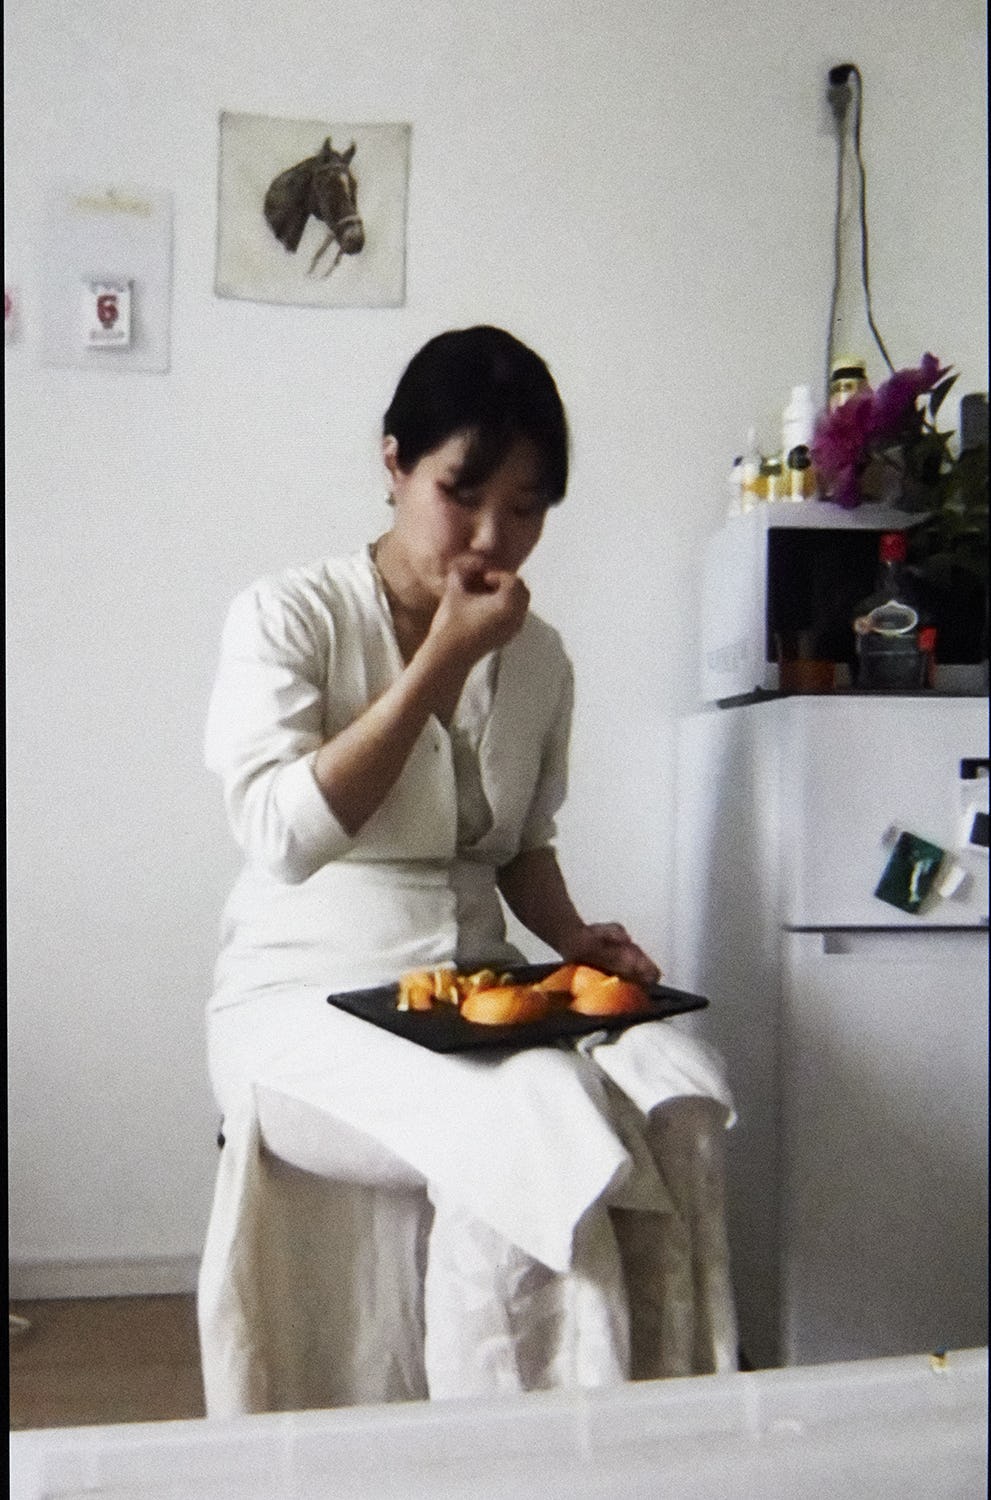 'Yuiko' from the series The Act of Sitting by the Ritsch Sisters